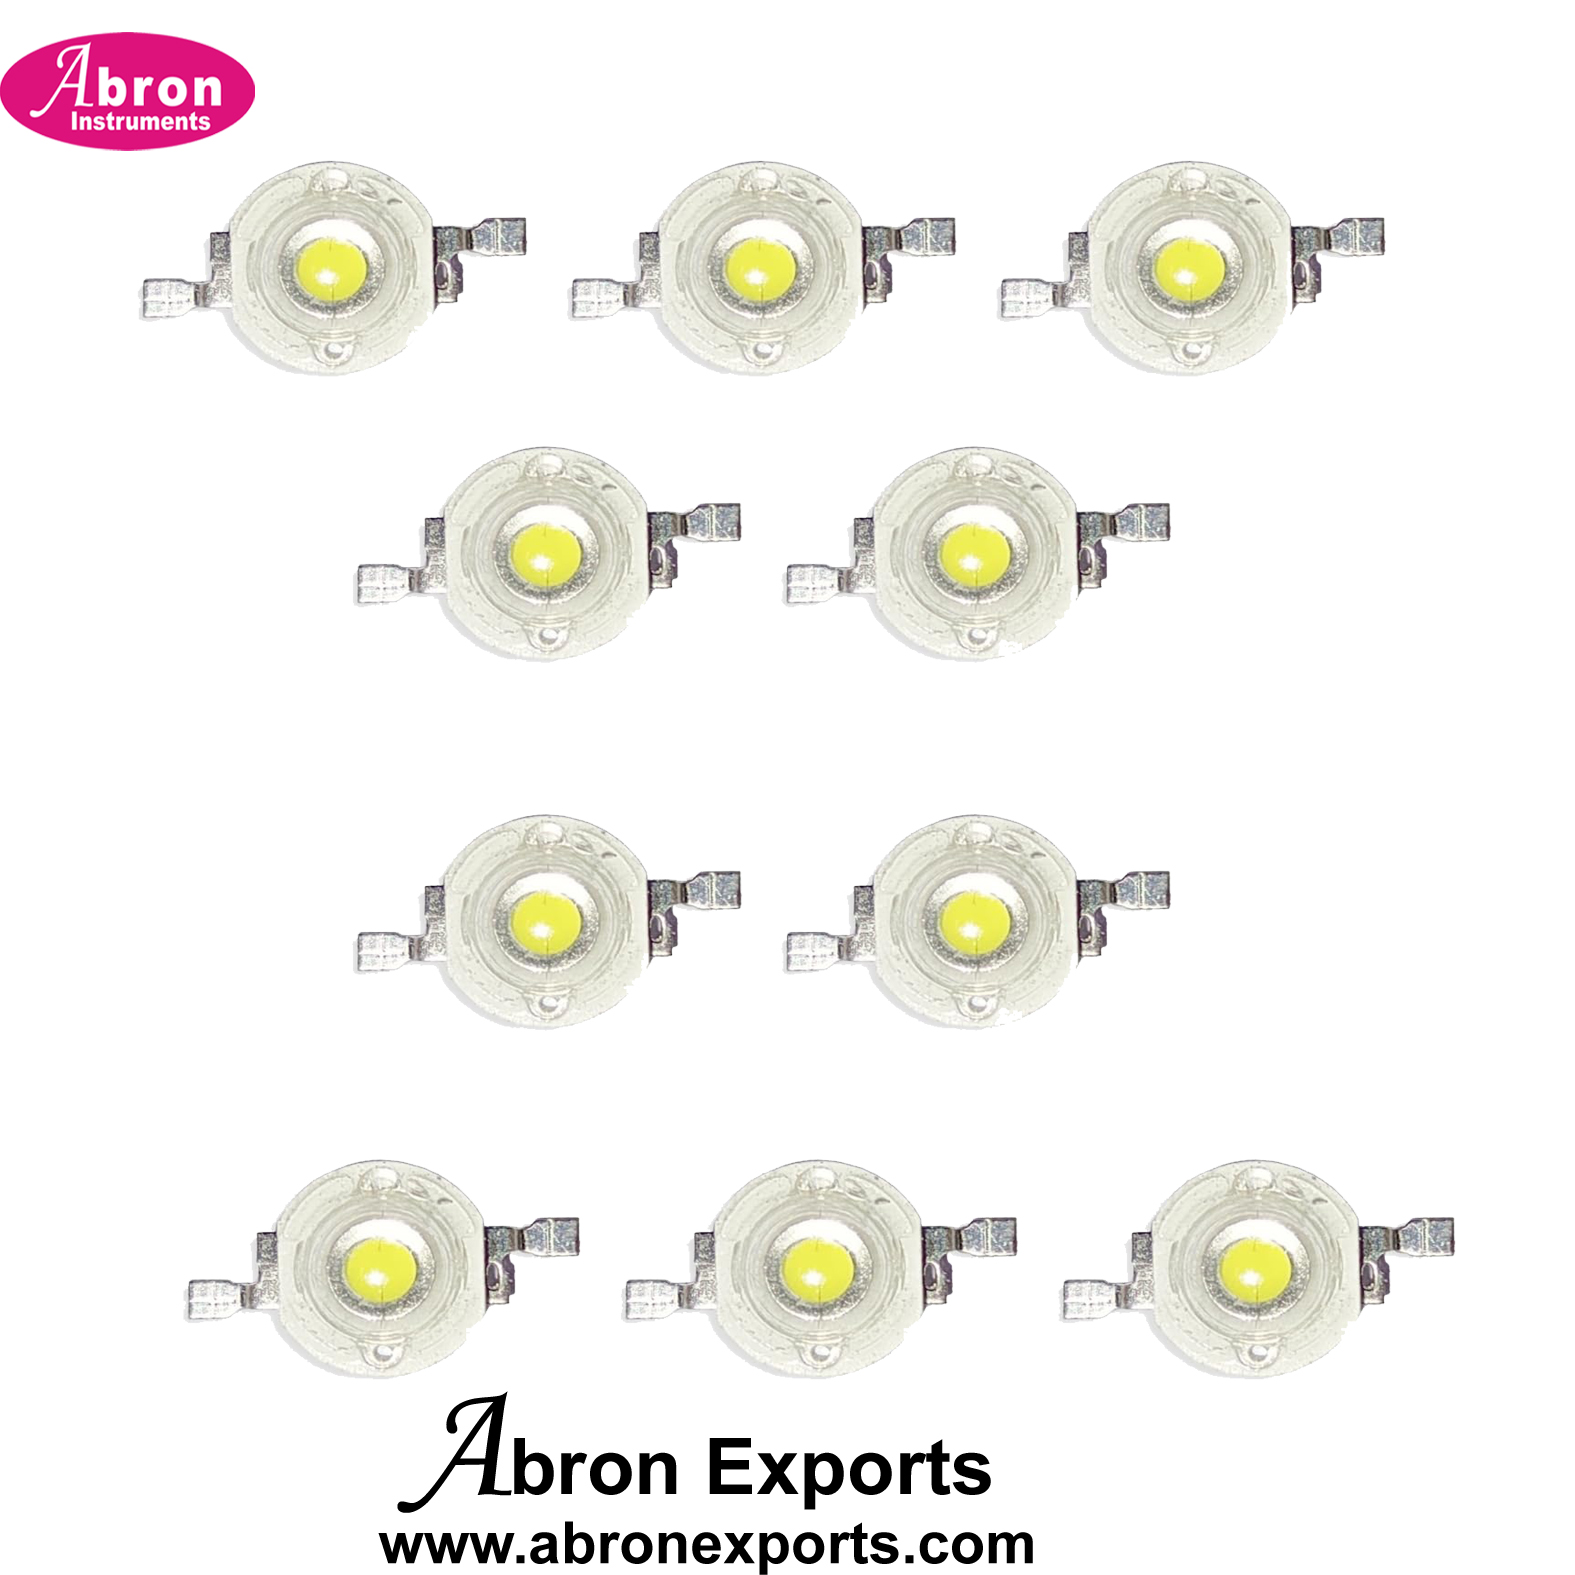 Electronic component loose spare LED Lamp Volt 3Volt 1Watt DC LED 100pc Module Multipurpose Use DIY Projects,Hobby Kit Abron AE-1224LED3V 